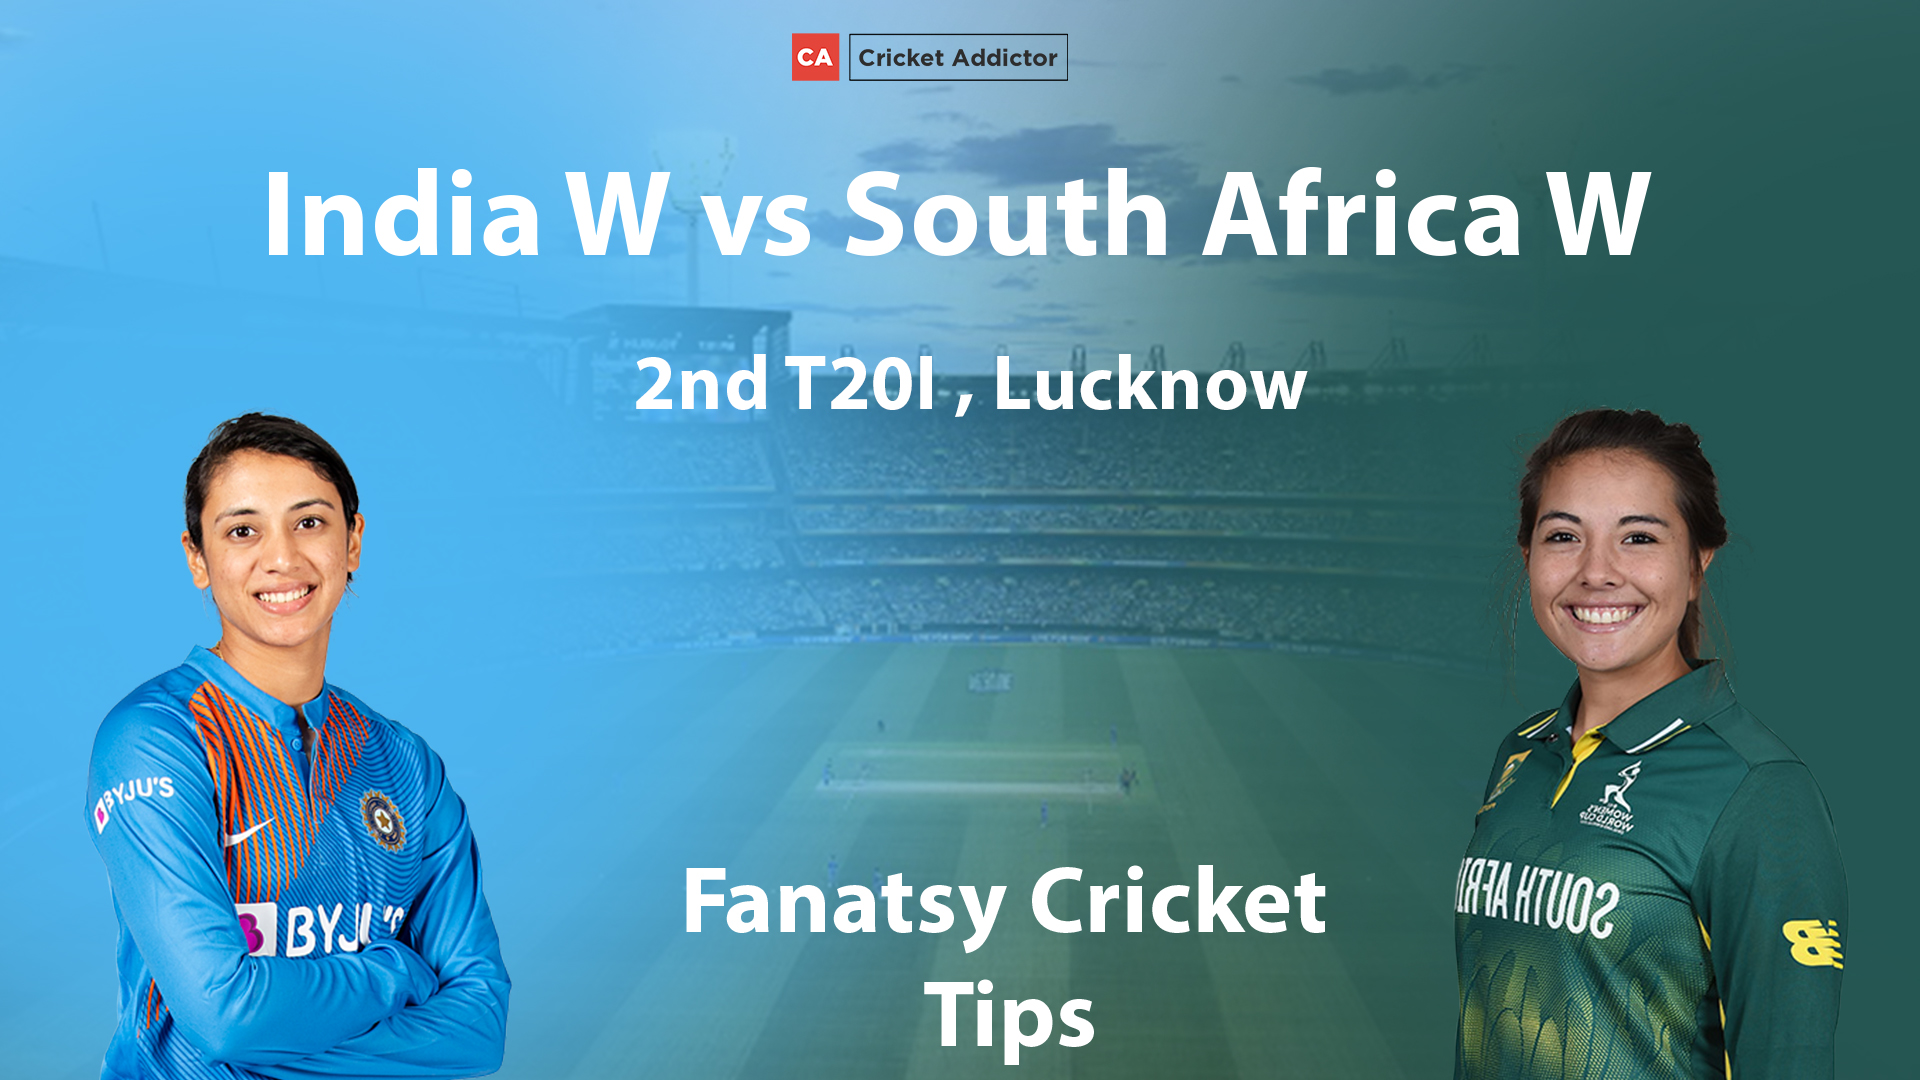 India Women vs South Africa Women Dream11 Prediction, Fantasy Cricket Tips, Playing XI, Pitch Report, Dream11 Team, and Injury Update.